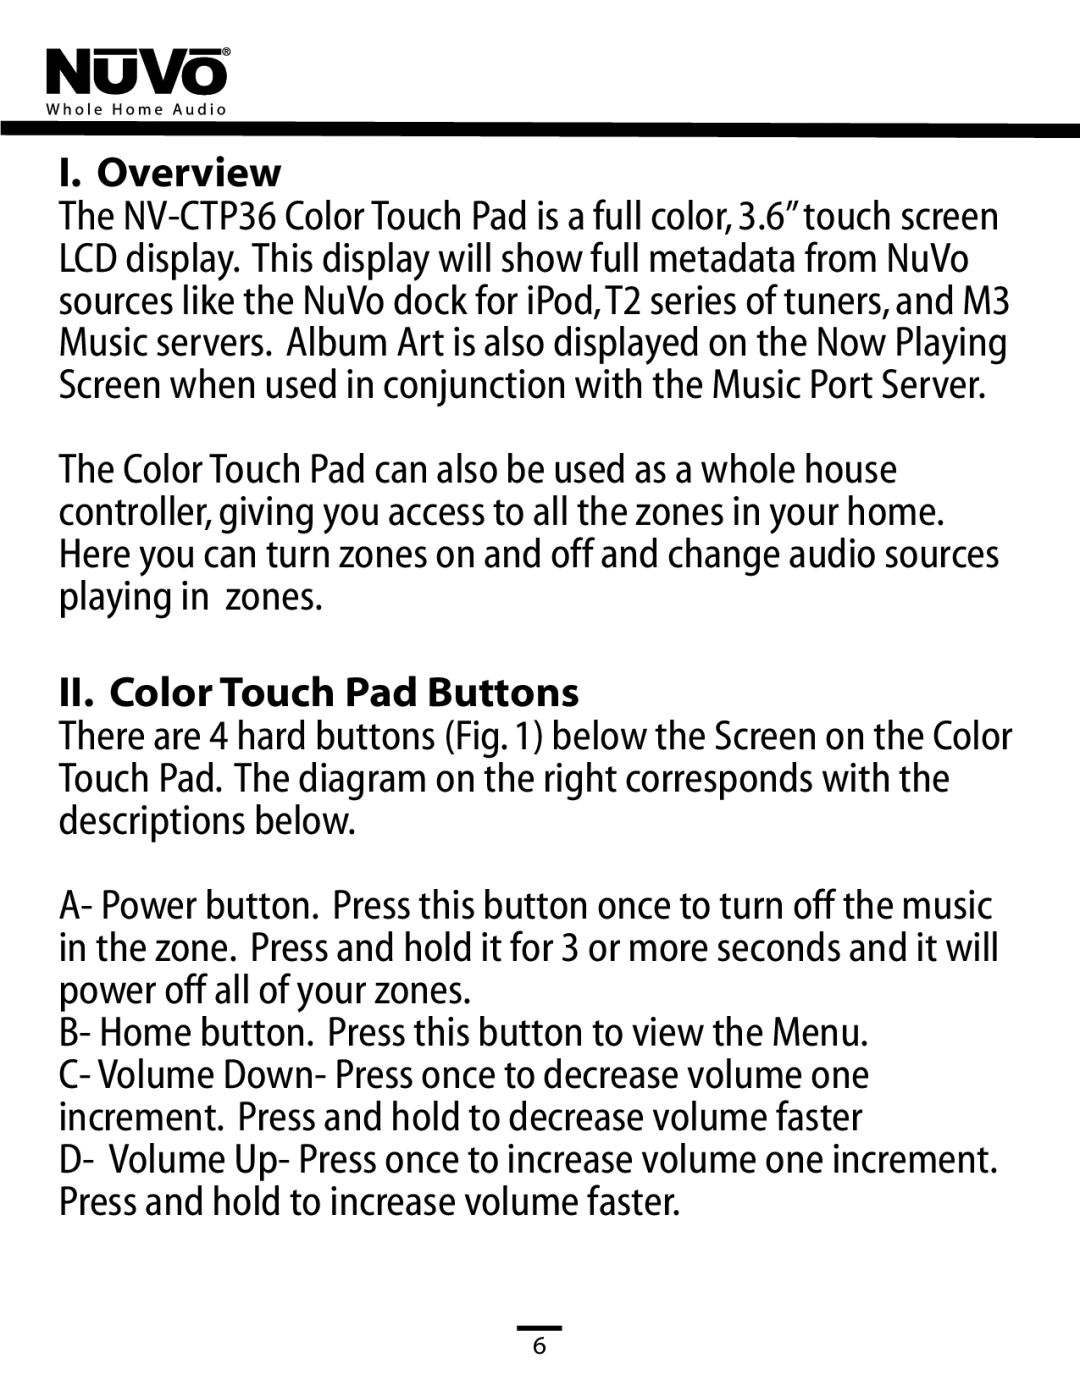 Nuvo NV-CTP36 manual I. Overview, II. Color Touch Pad Buttons 